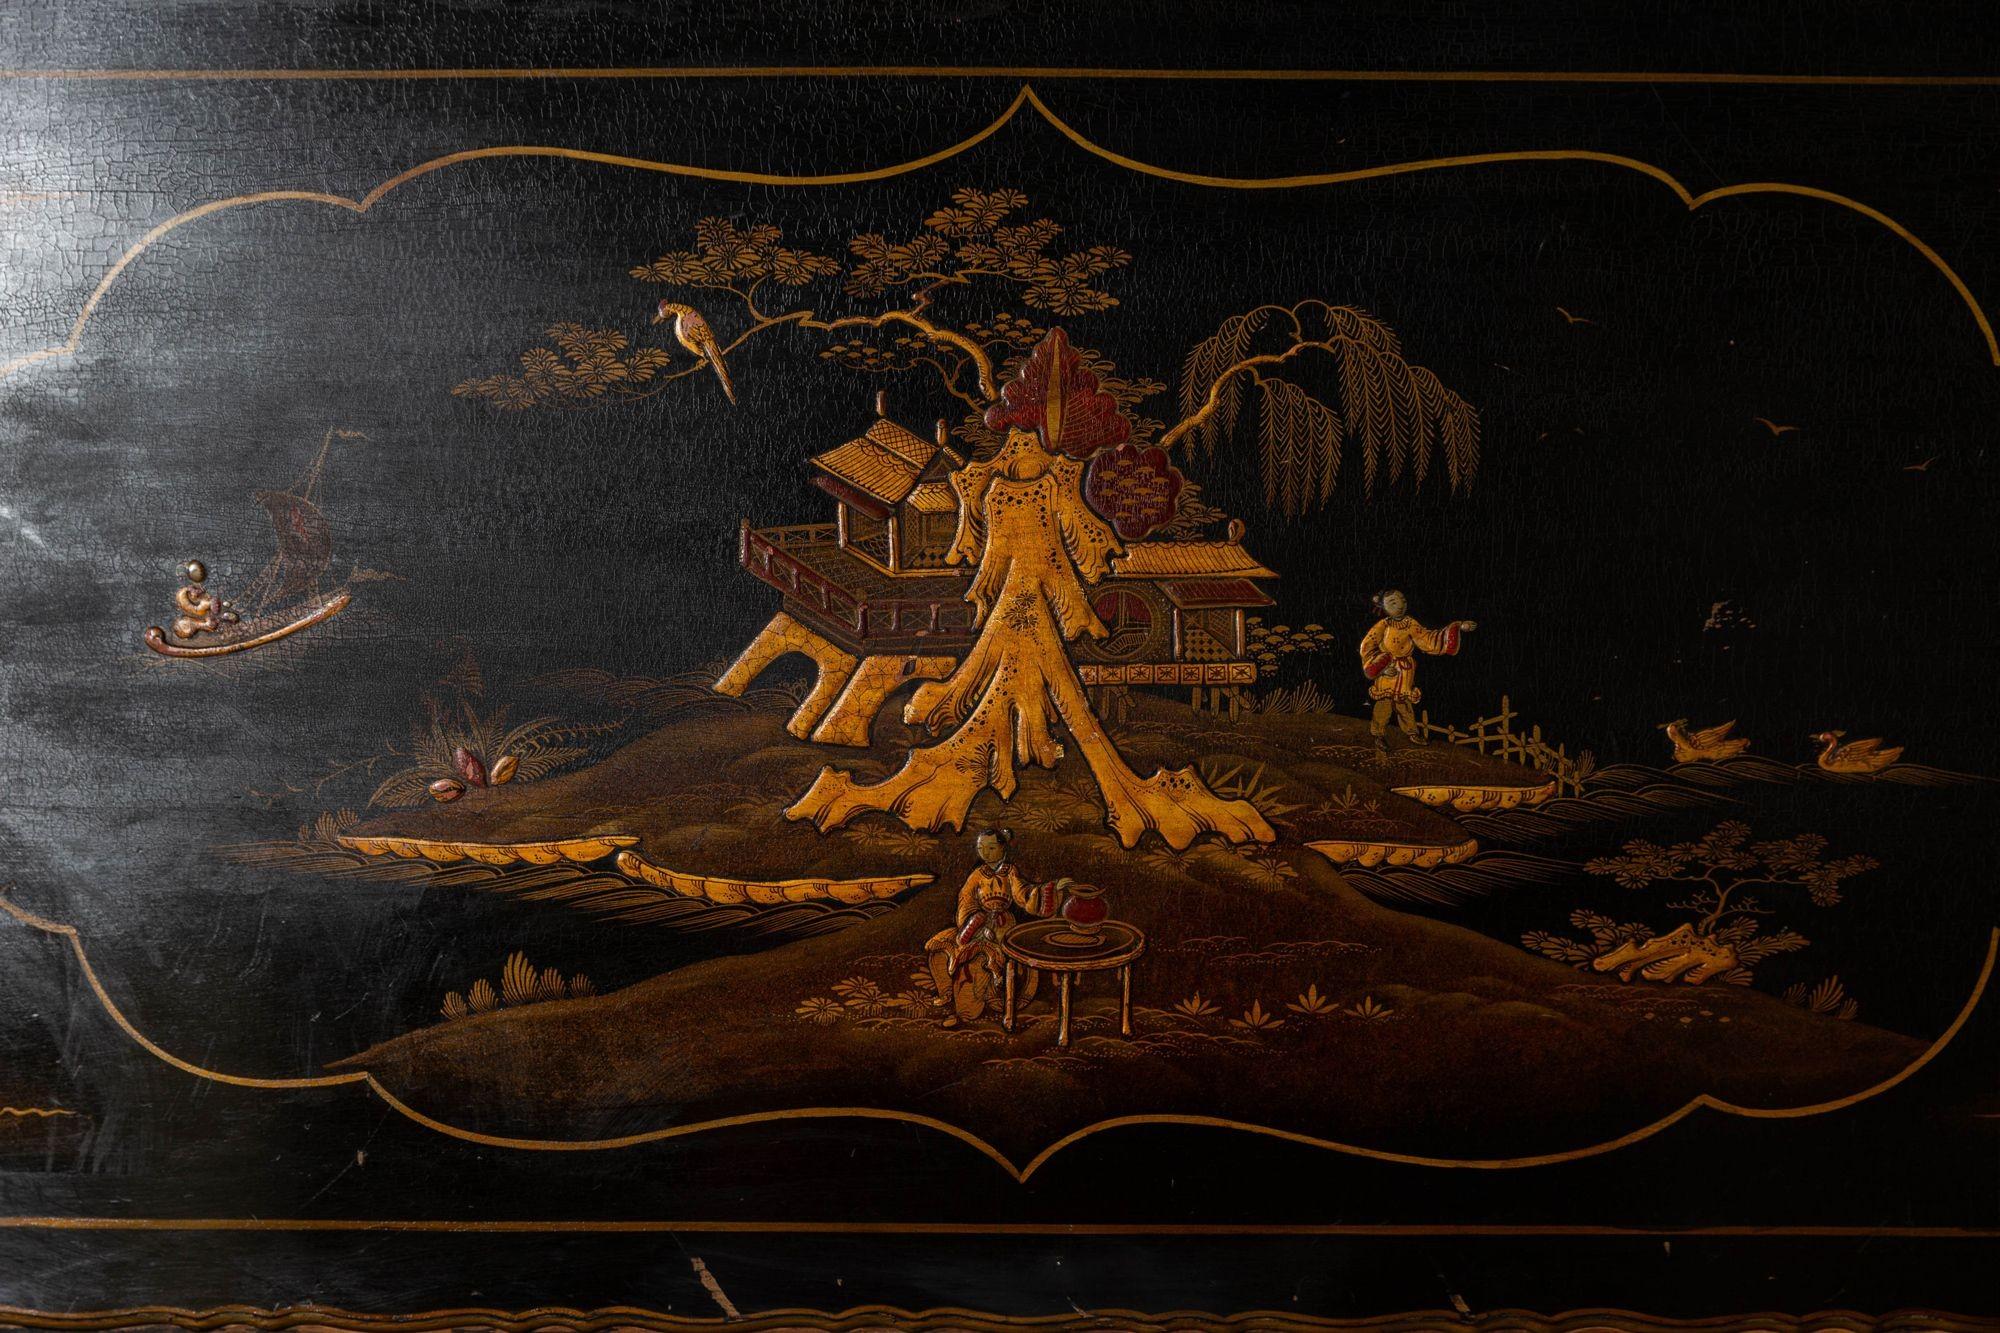 circa 1910
English Lacquered Chinoiserie Double Bed
sku 1369
W138 x D189 x H140cm